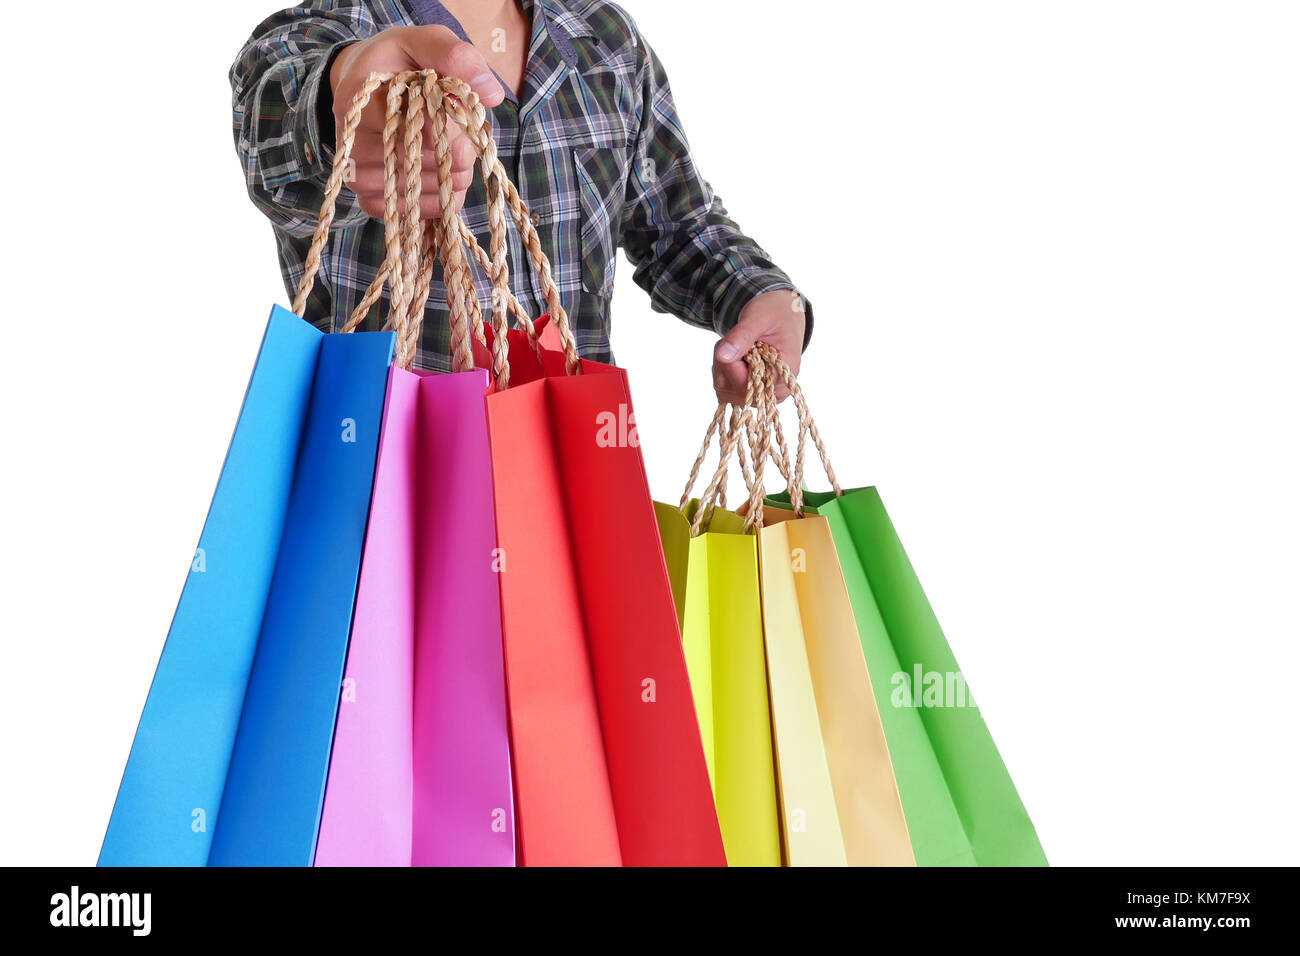 man hand holding colorful shopping bags isolated on white background Stock Photo